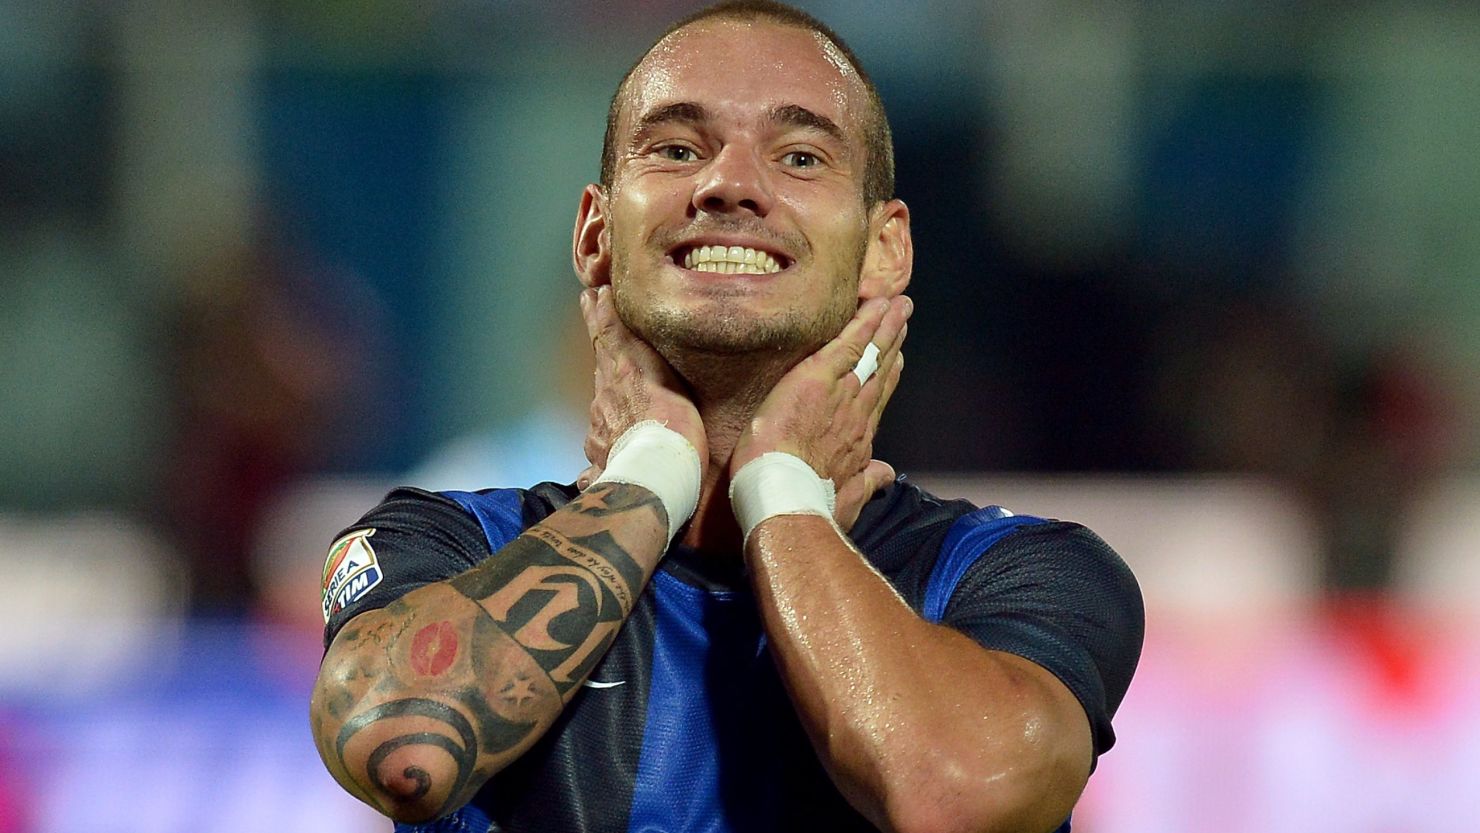 Dutch midfielder Wesley Sneijder last played a competitive game for Inter Milan back in September last year